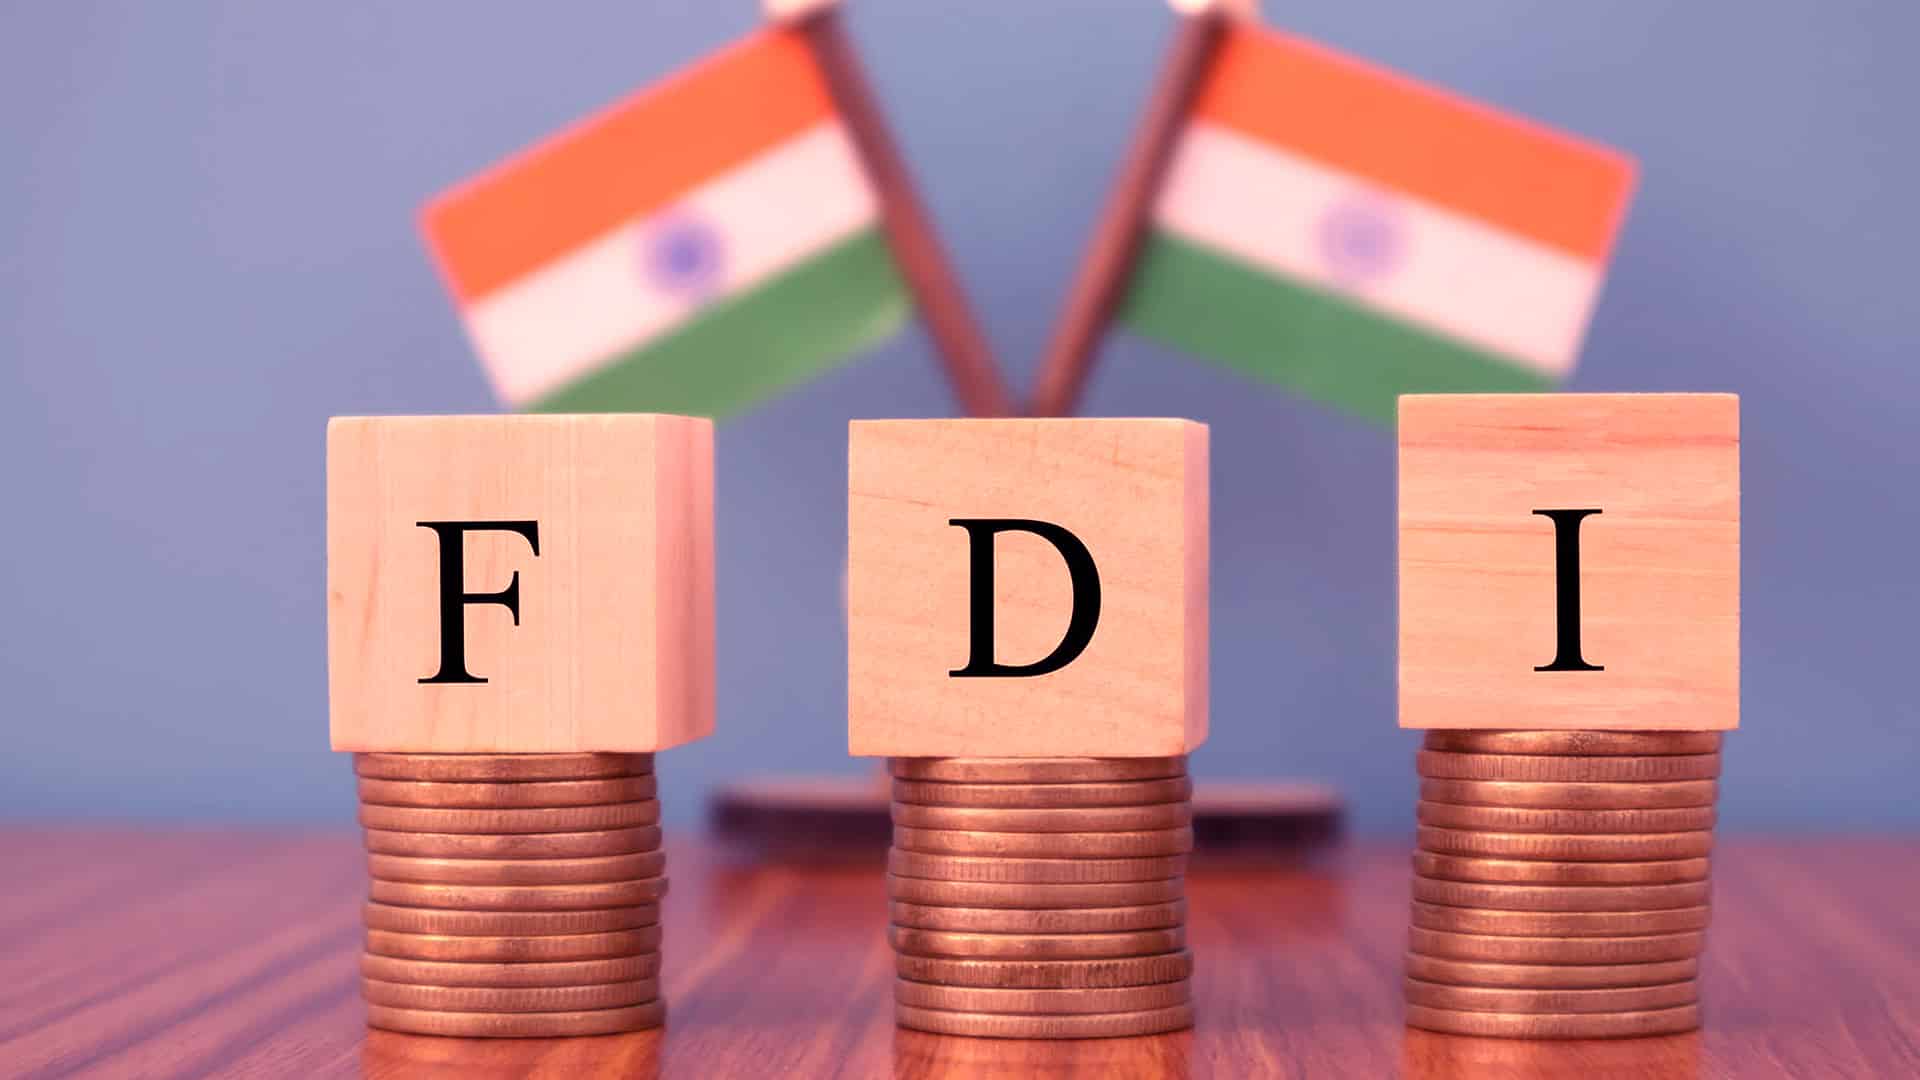 Govt to come out with certain clarifications on FDI in e-commerce sector shortly: Goyal